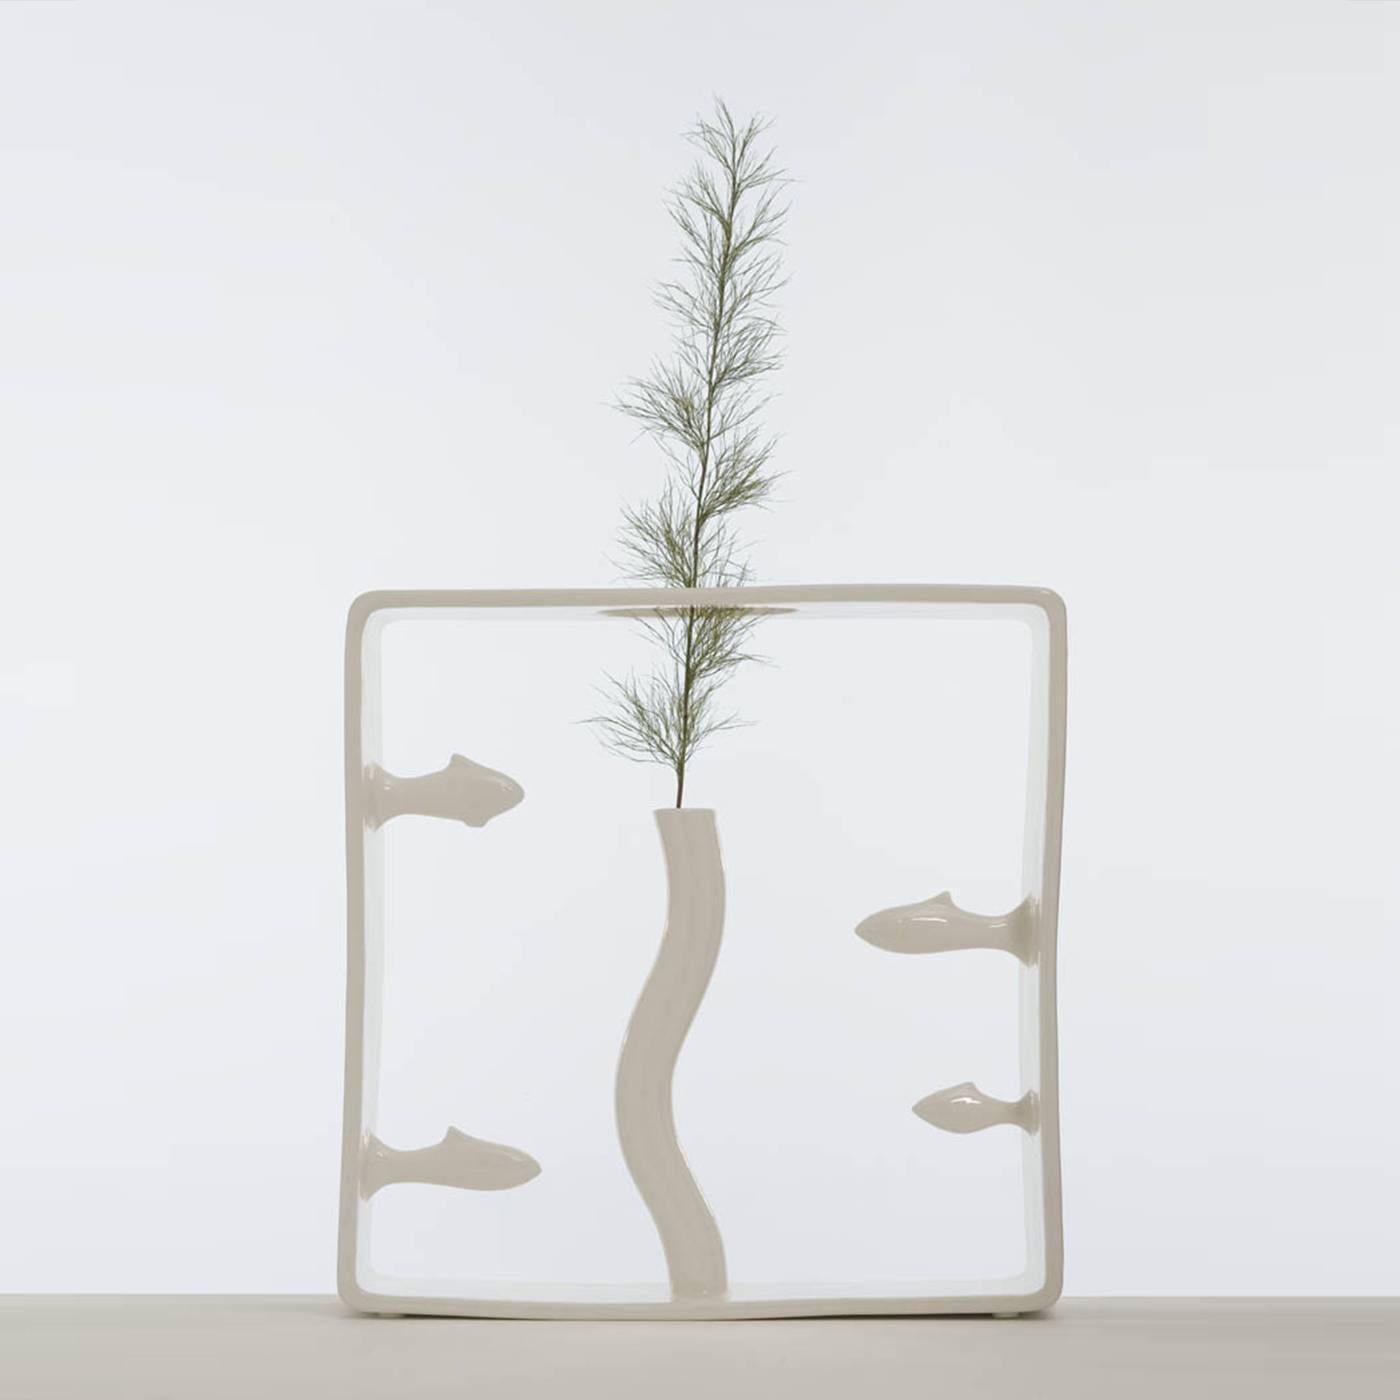 Part of the Portali collection by Andrea Branzi, this vase was made in white ceramic in a limited edition of 50 pieces that are all numbered and signed. The delicate square frame encapsulates a waving vertical vase that seems to be part of an